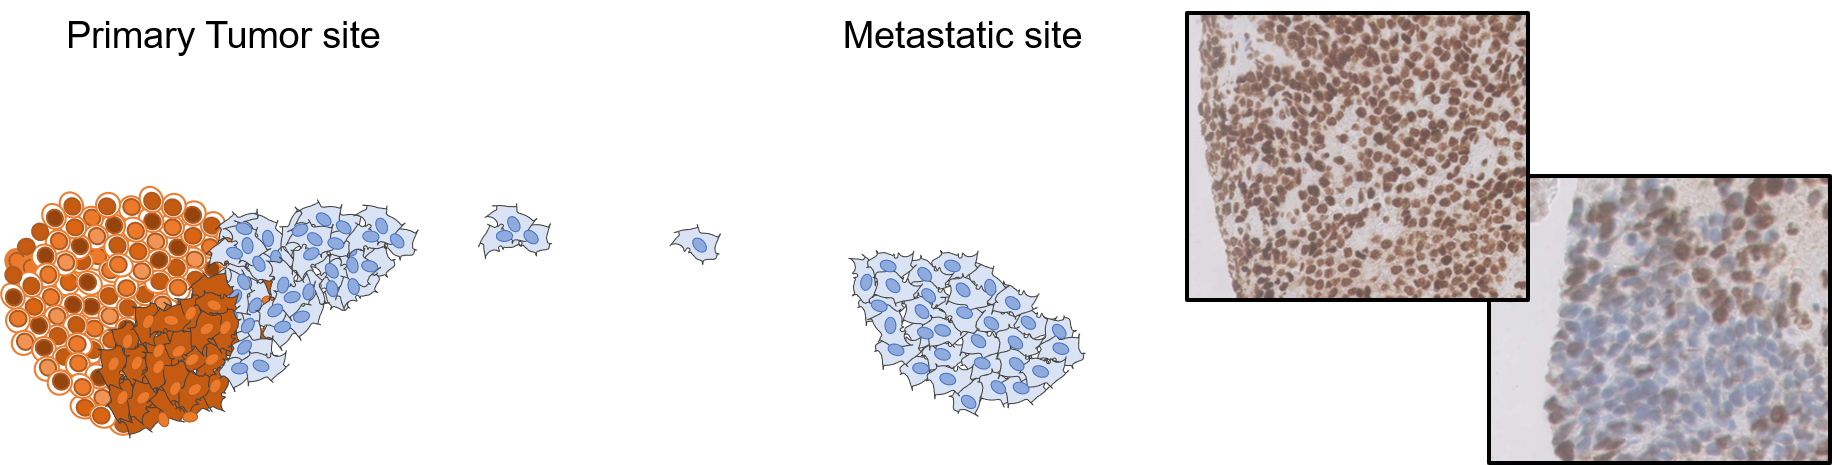 Graphical representation of tumor cells in different stages of mutation.